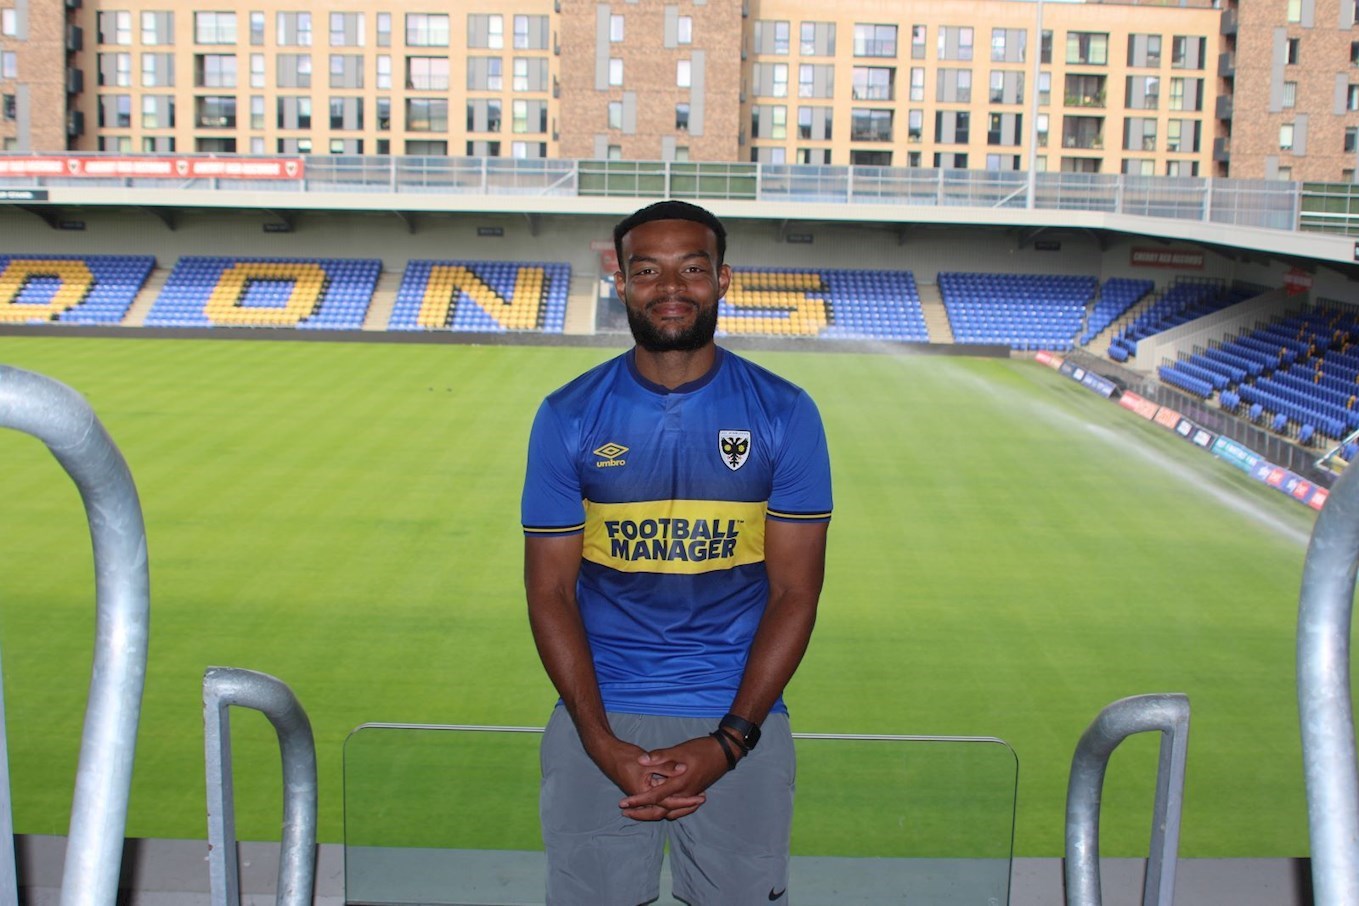 Signing six: Experienced centre-back joins - News - AFC Wimbledon